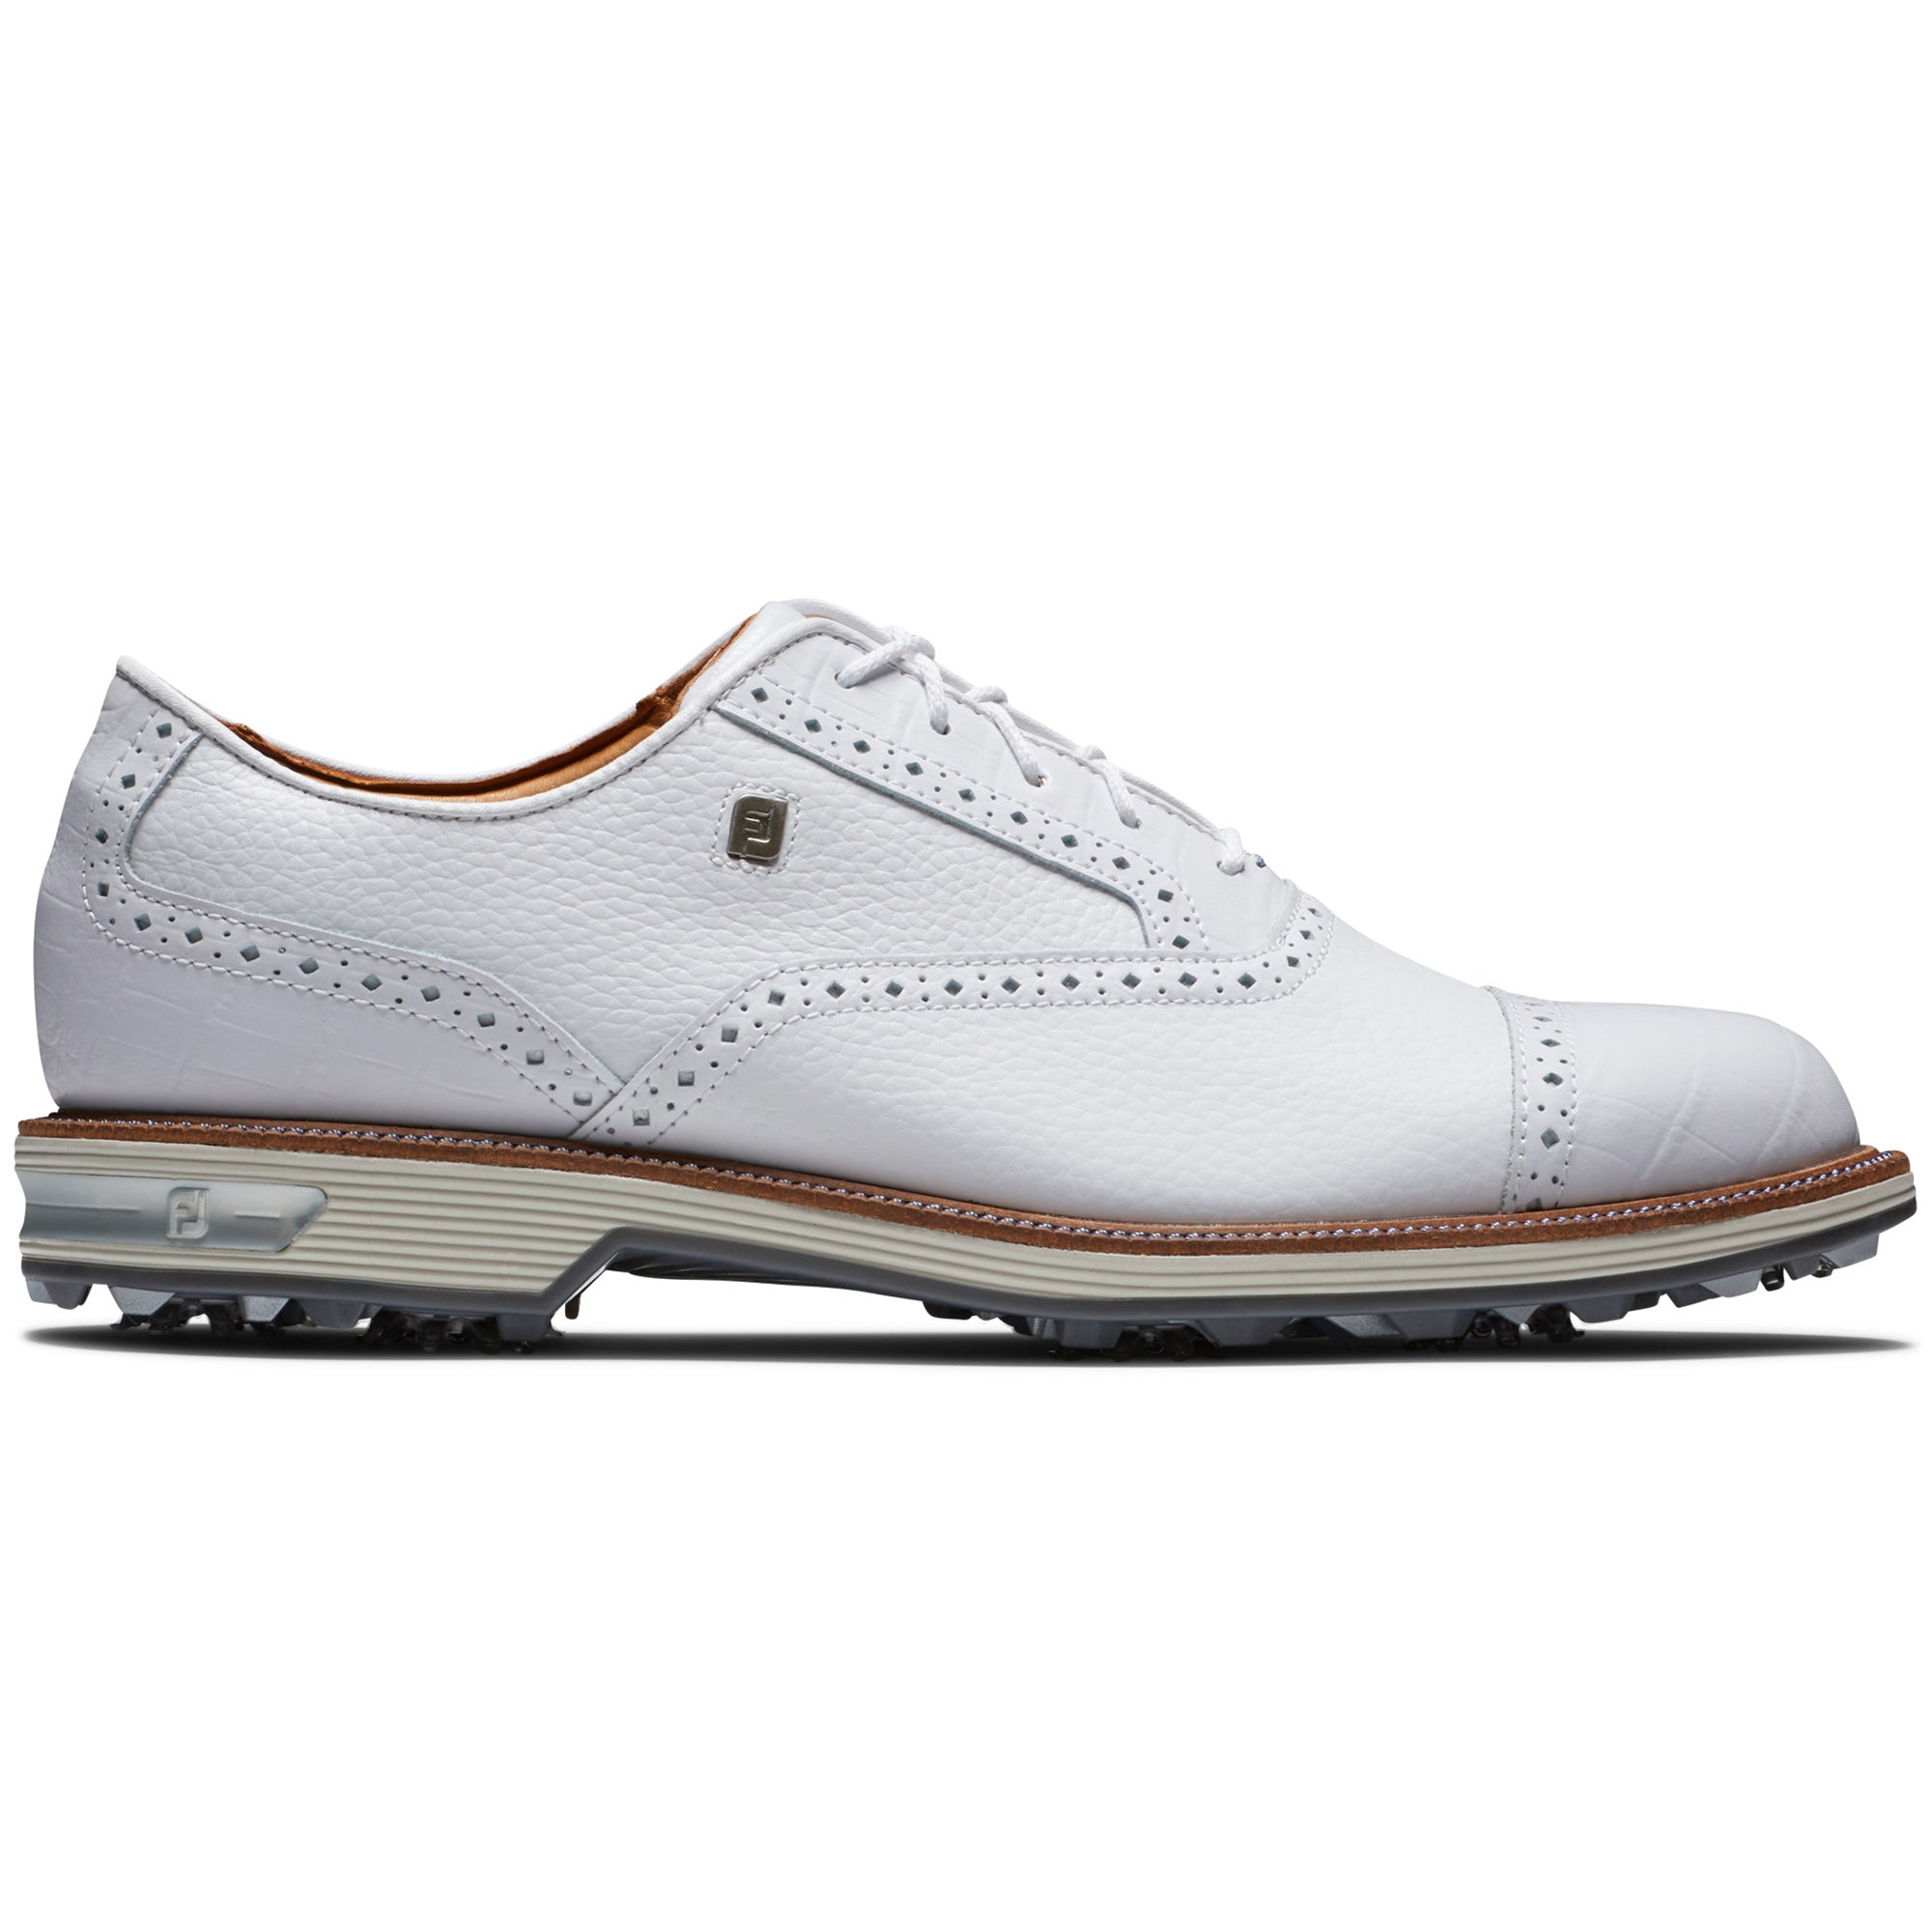 FootJoy Premiere Series Tarlow Golf Shoes White | Function18 | Restrictedgs